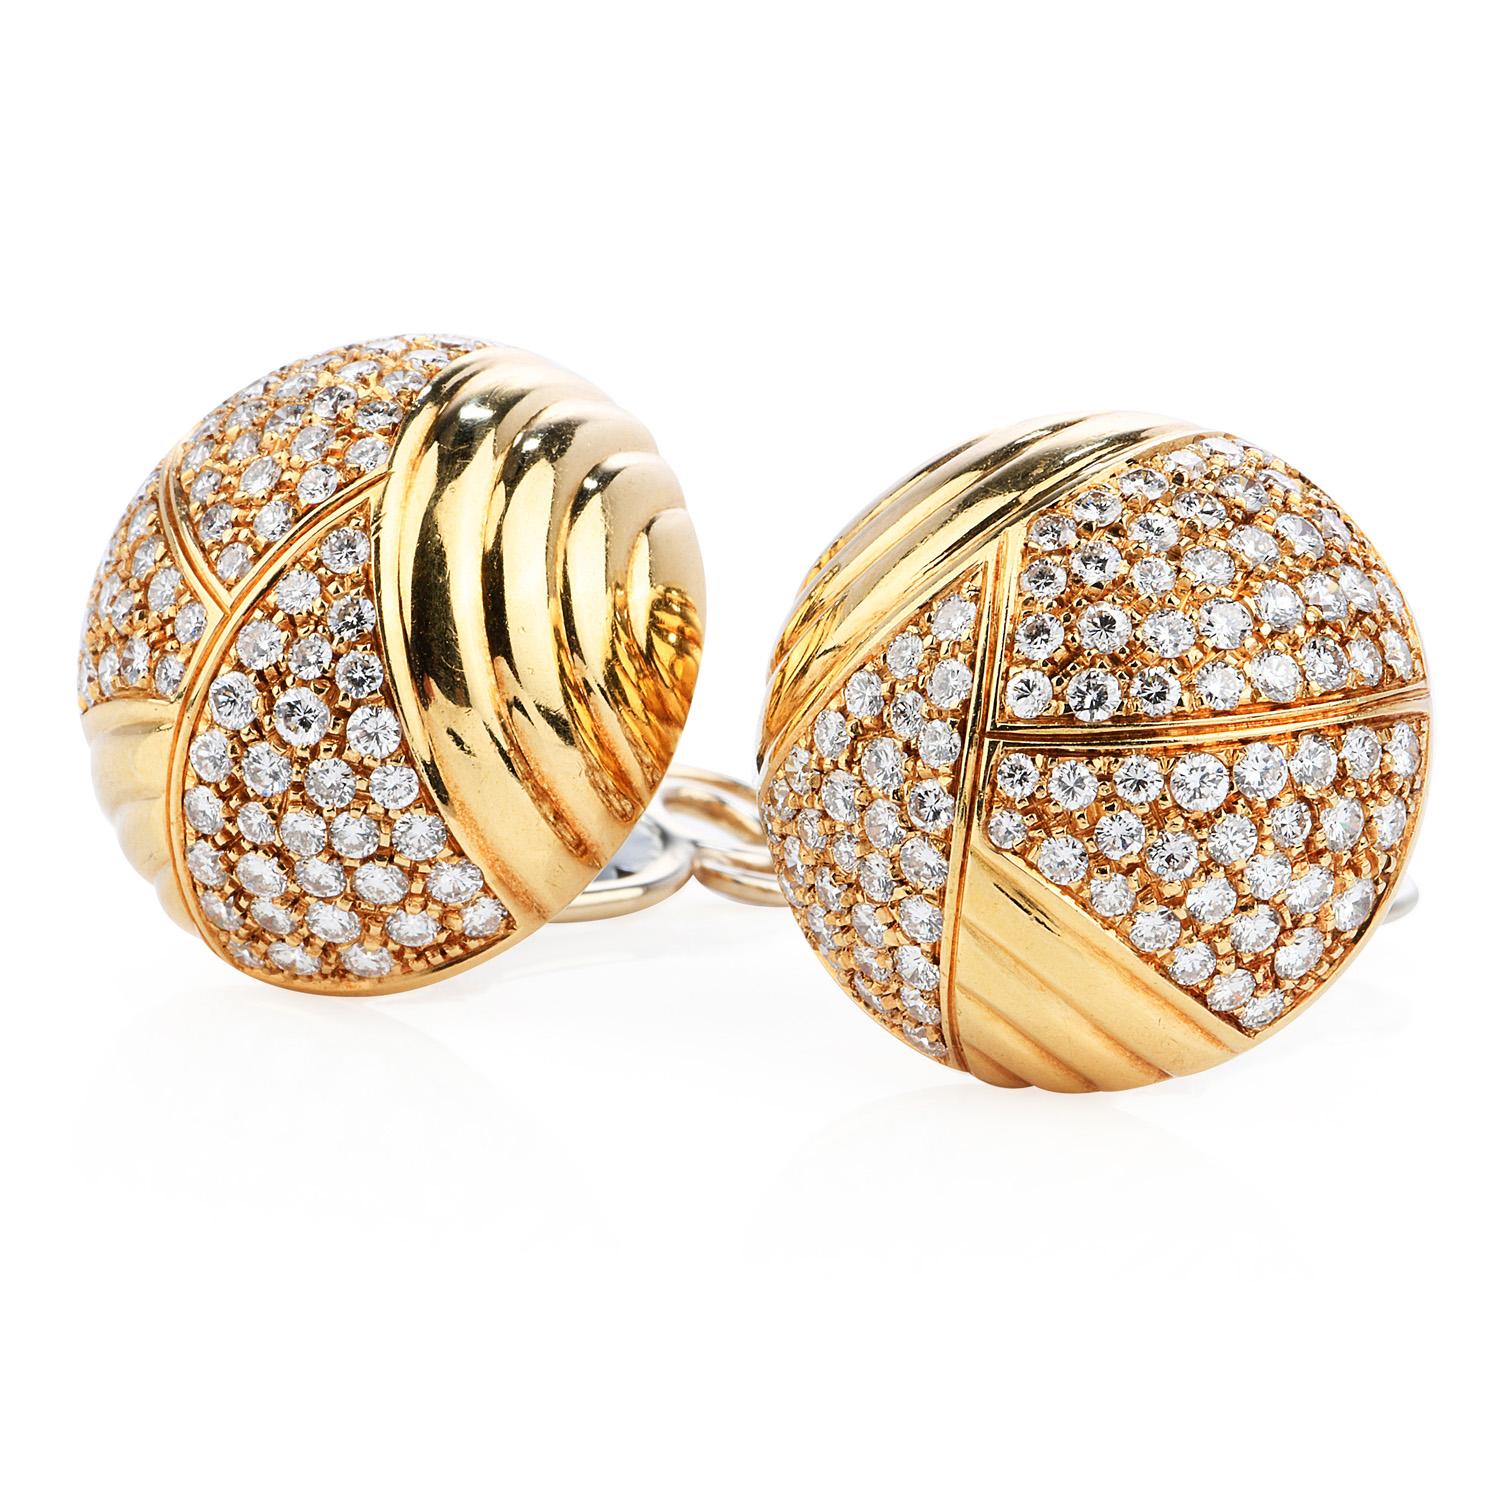 Vintage Cartier from mid-80s to early 90s, cluster dome clip on earrings, made for a sophisticated retro look,

Crafted in 18K yellow gold, the piece is enhanced by Pave set round cut Diamonds weighing approximately 6.10 carats (F-G color and VVS